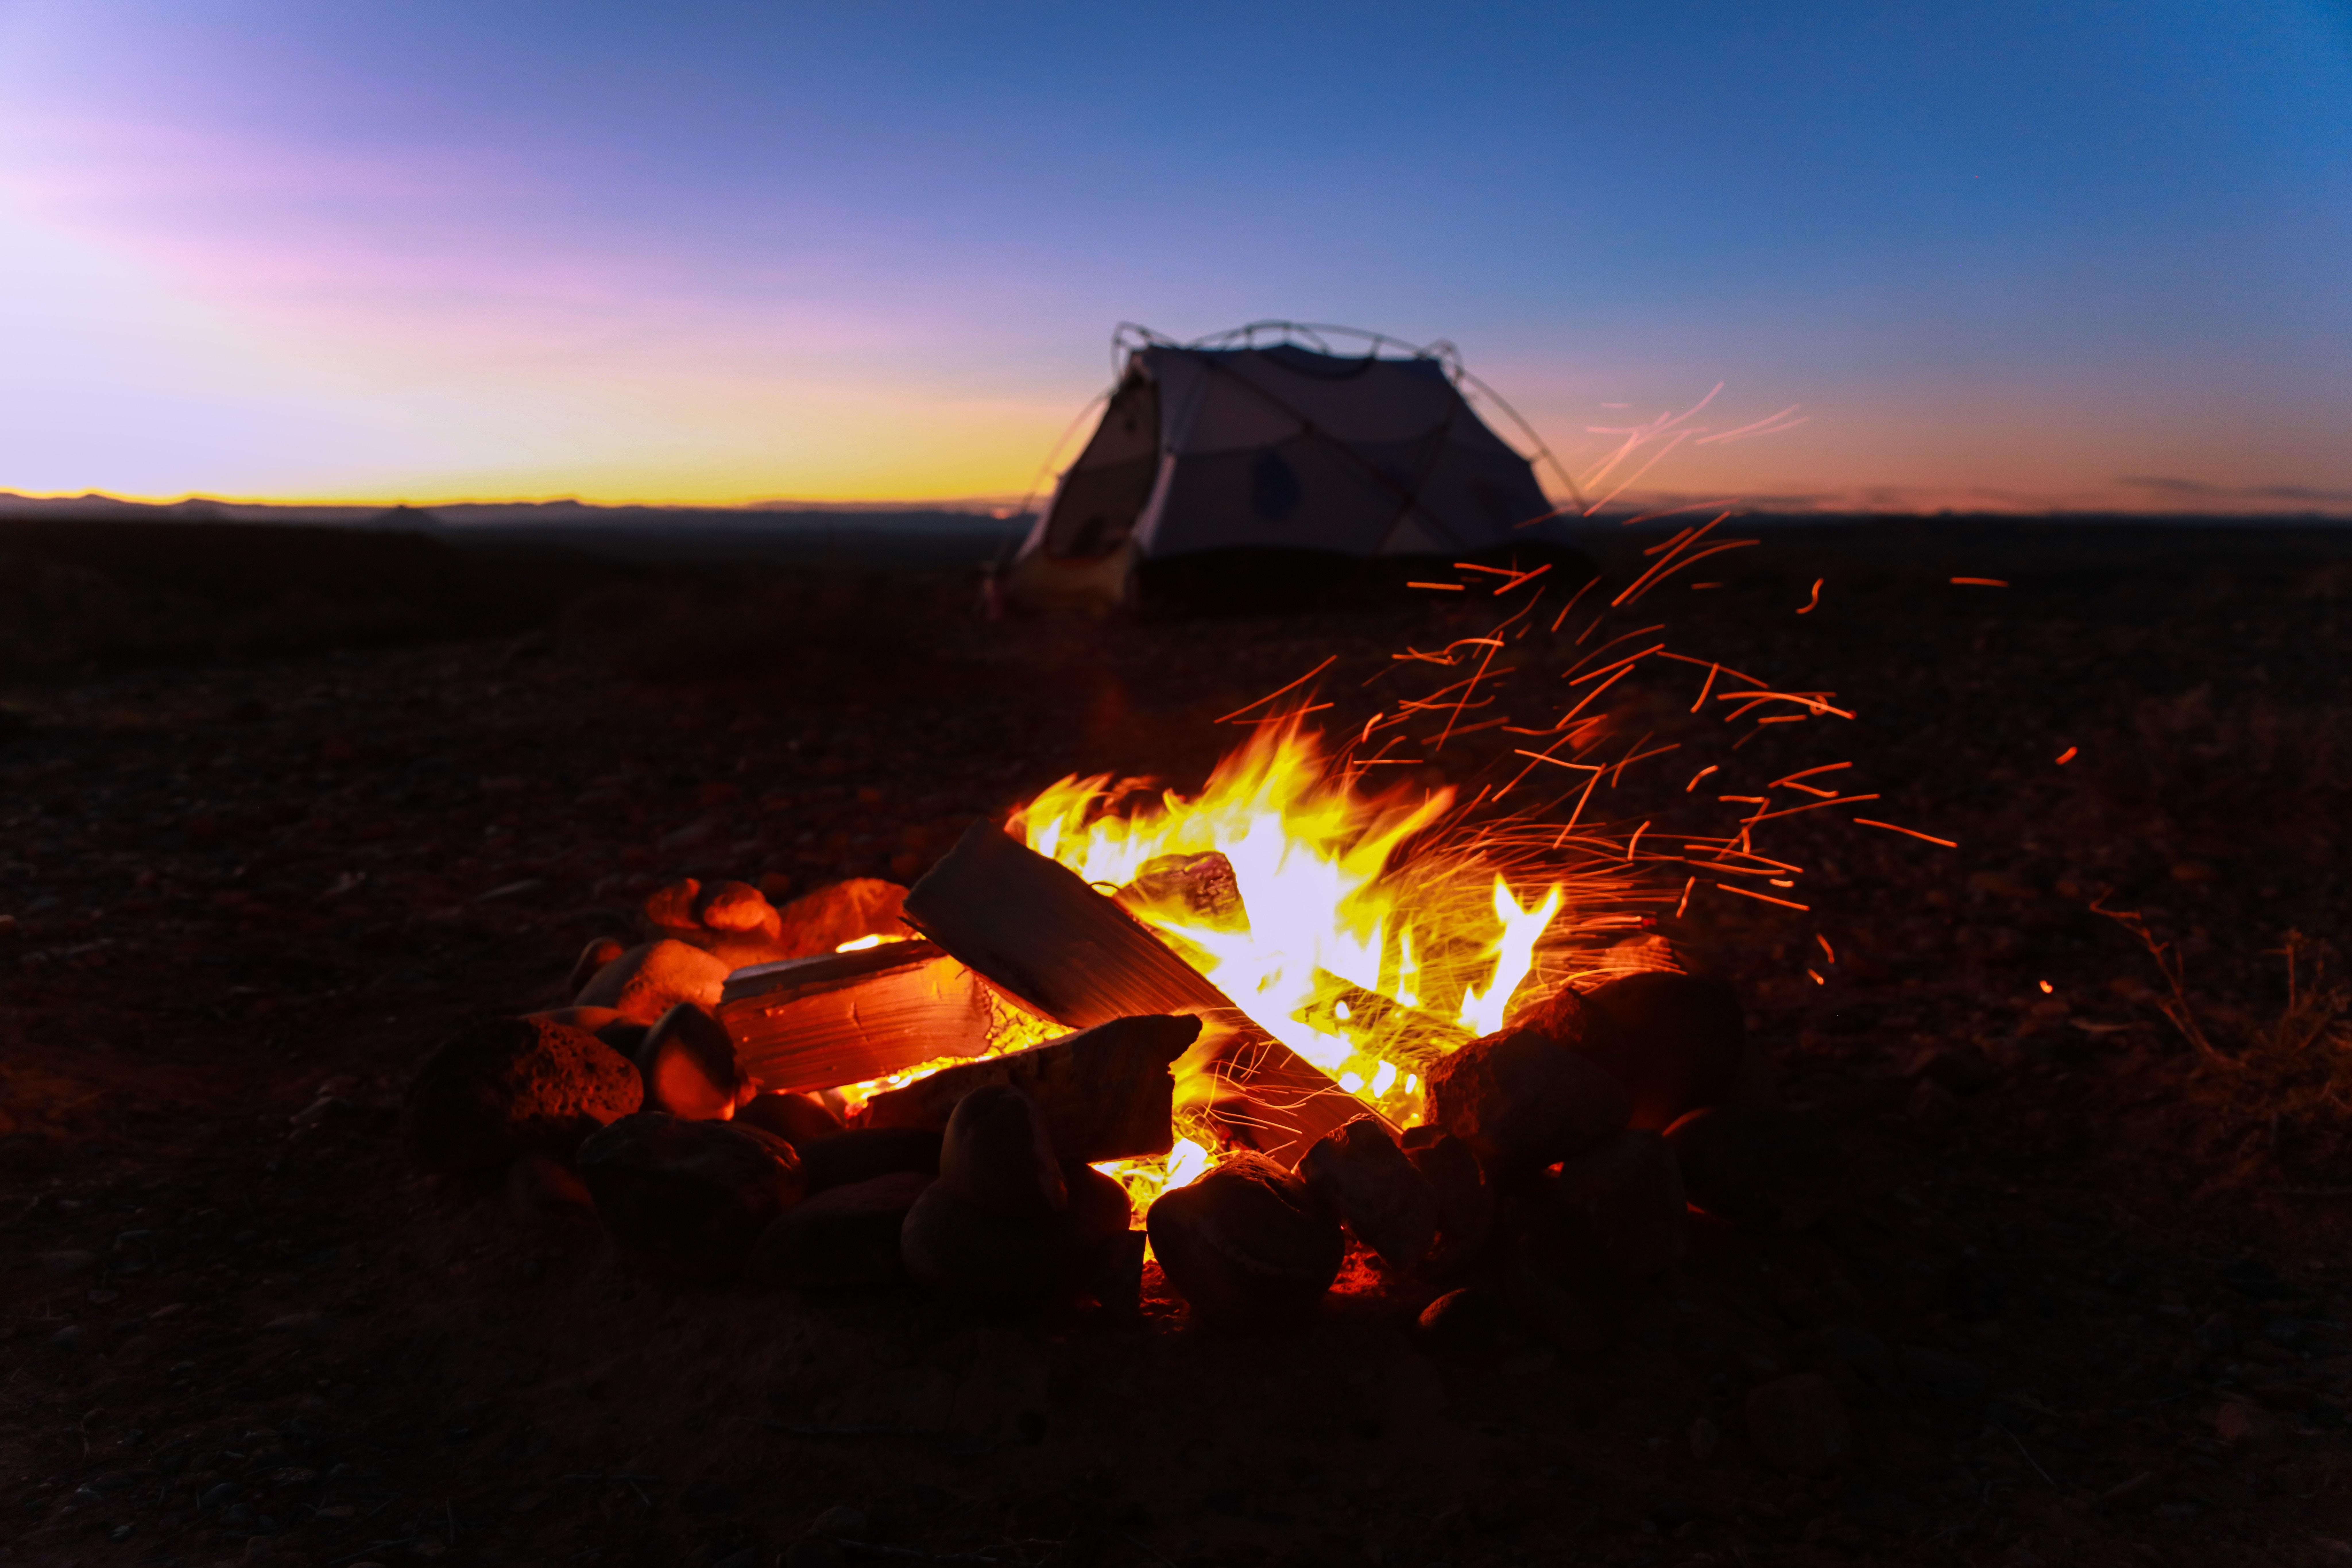 Campfire at a Campsite 8k Ultra HD Wallpaper. Background Image